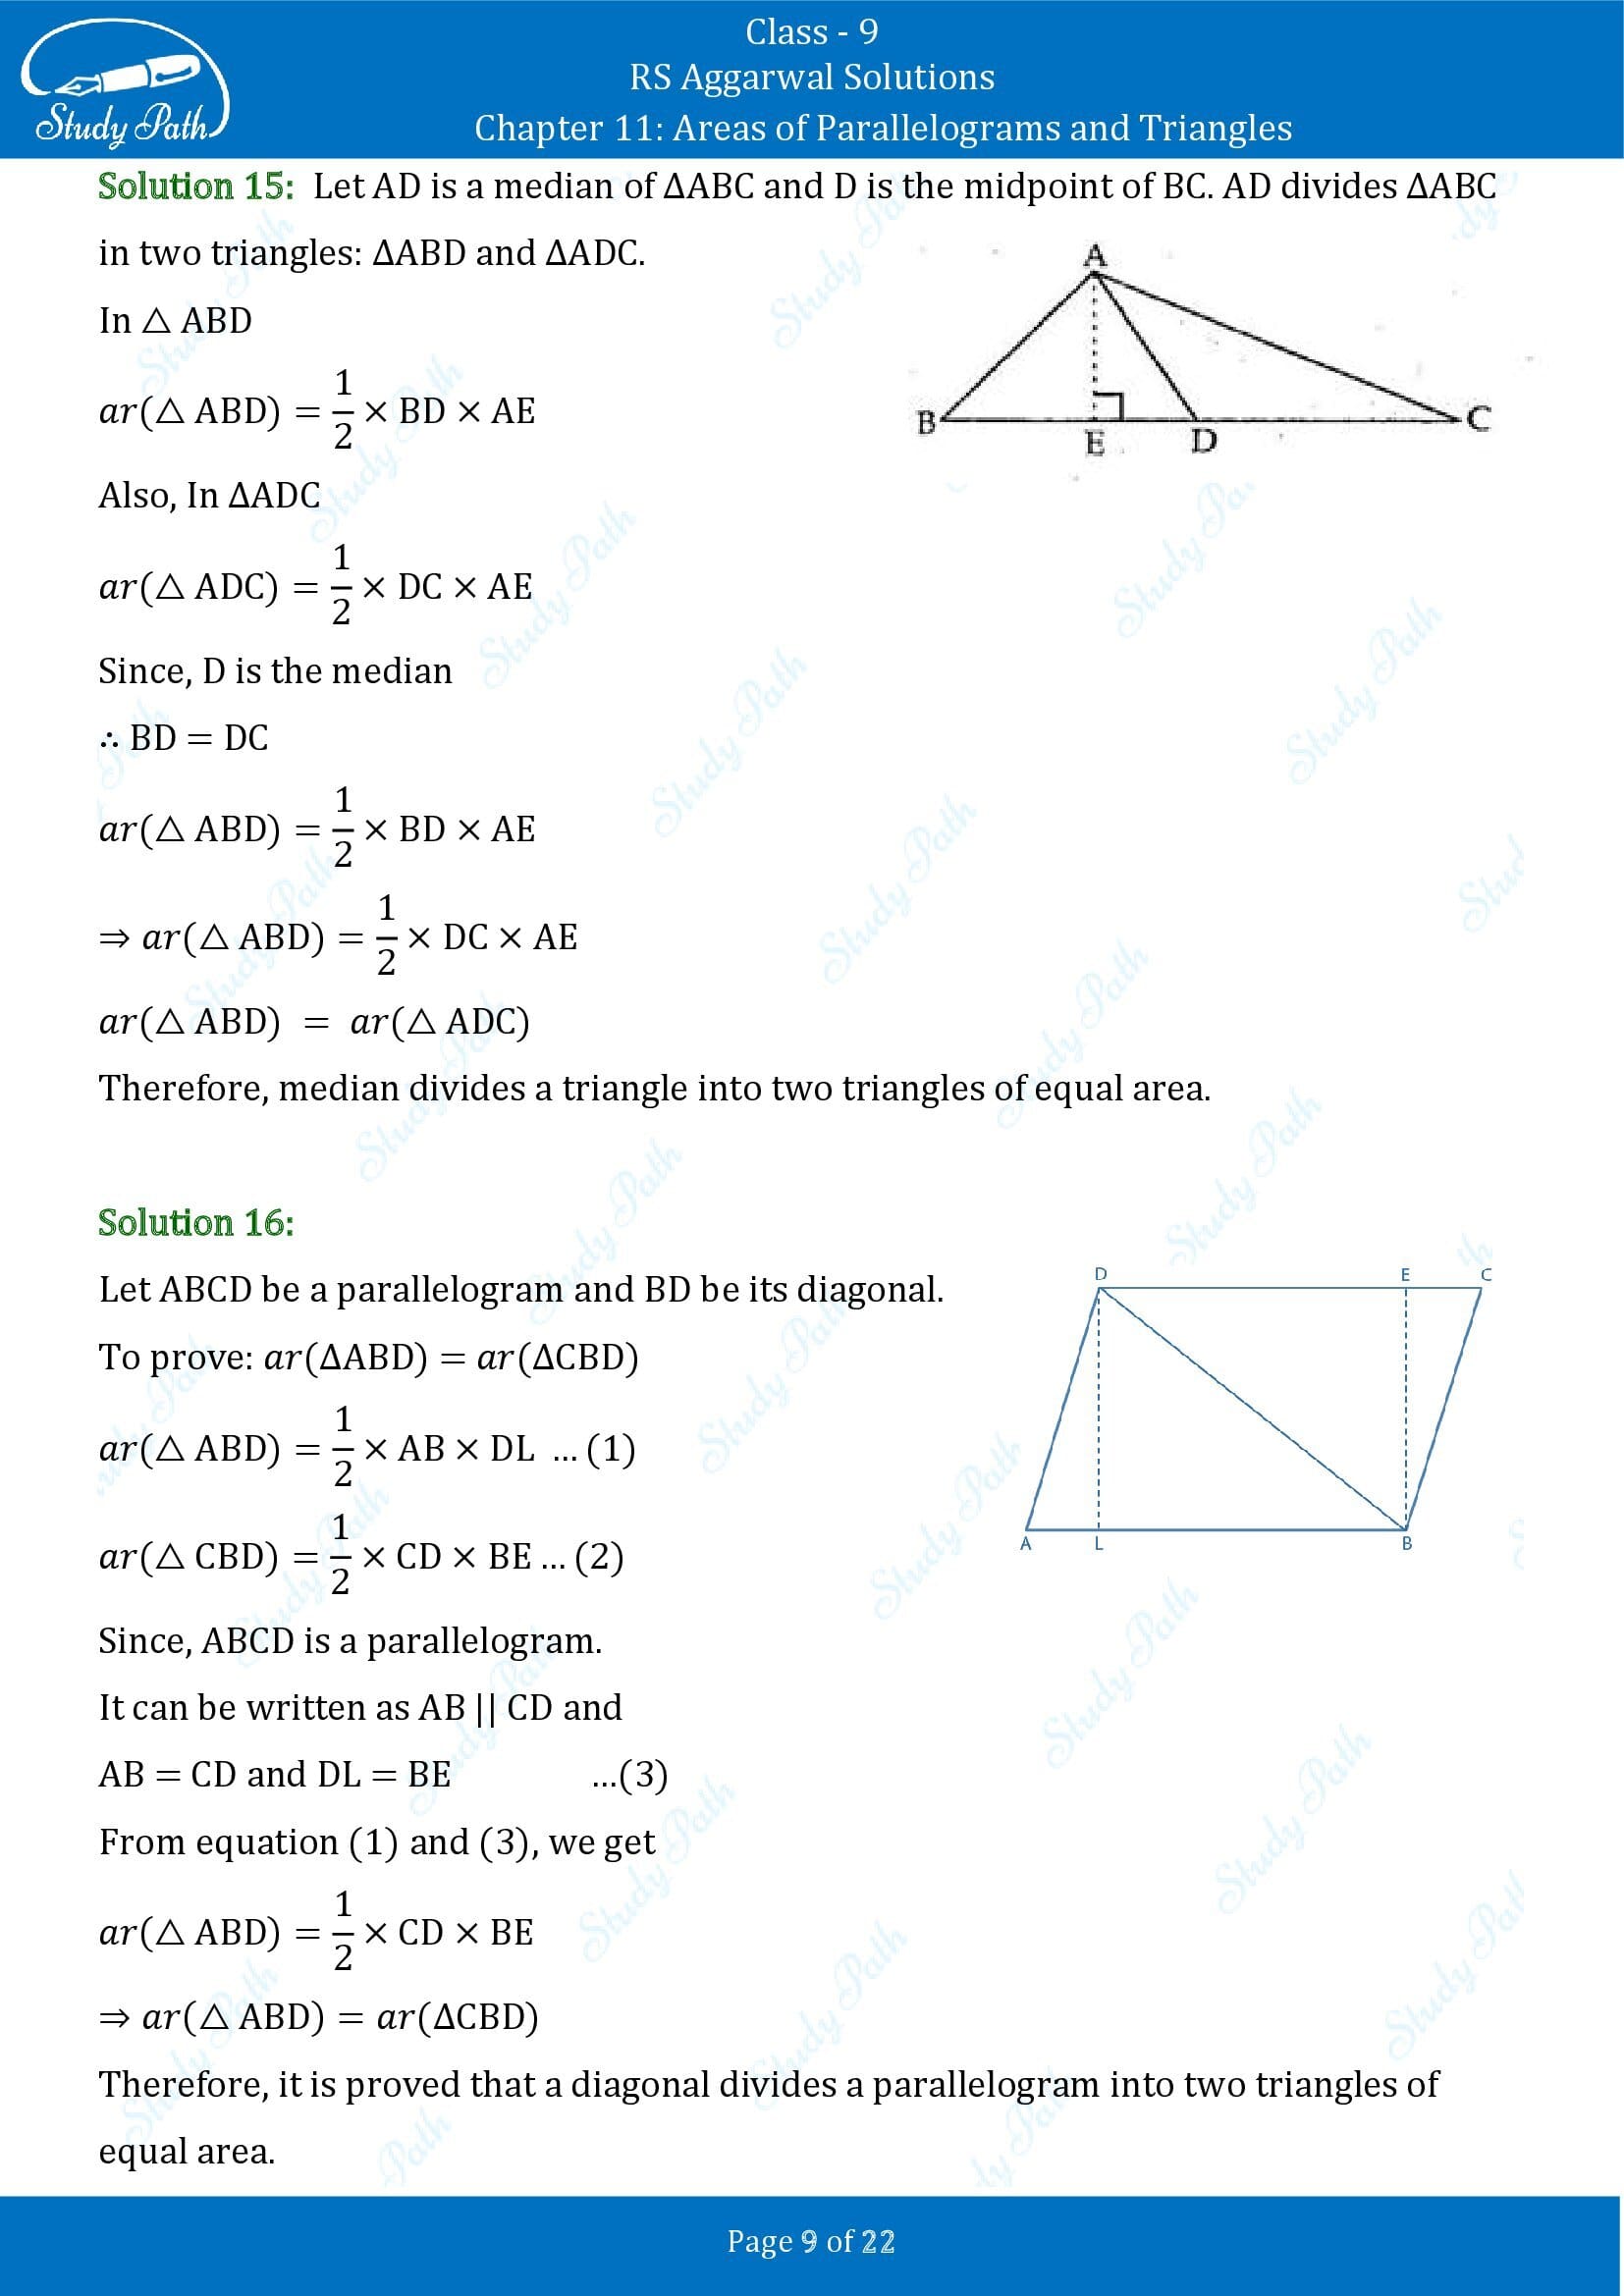 RS Aggarwal Solutions Class 9 Chapter 11 Areas of Parallelograms and Triangles Exercise 11 00009